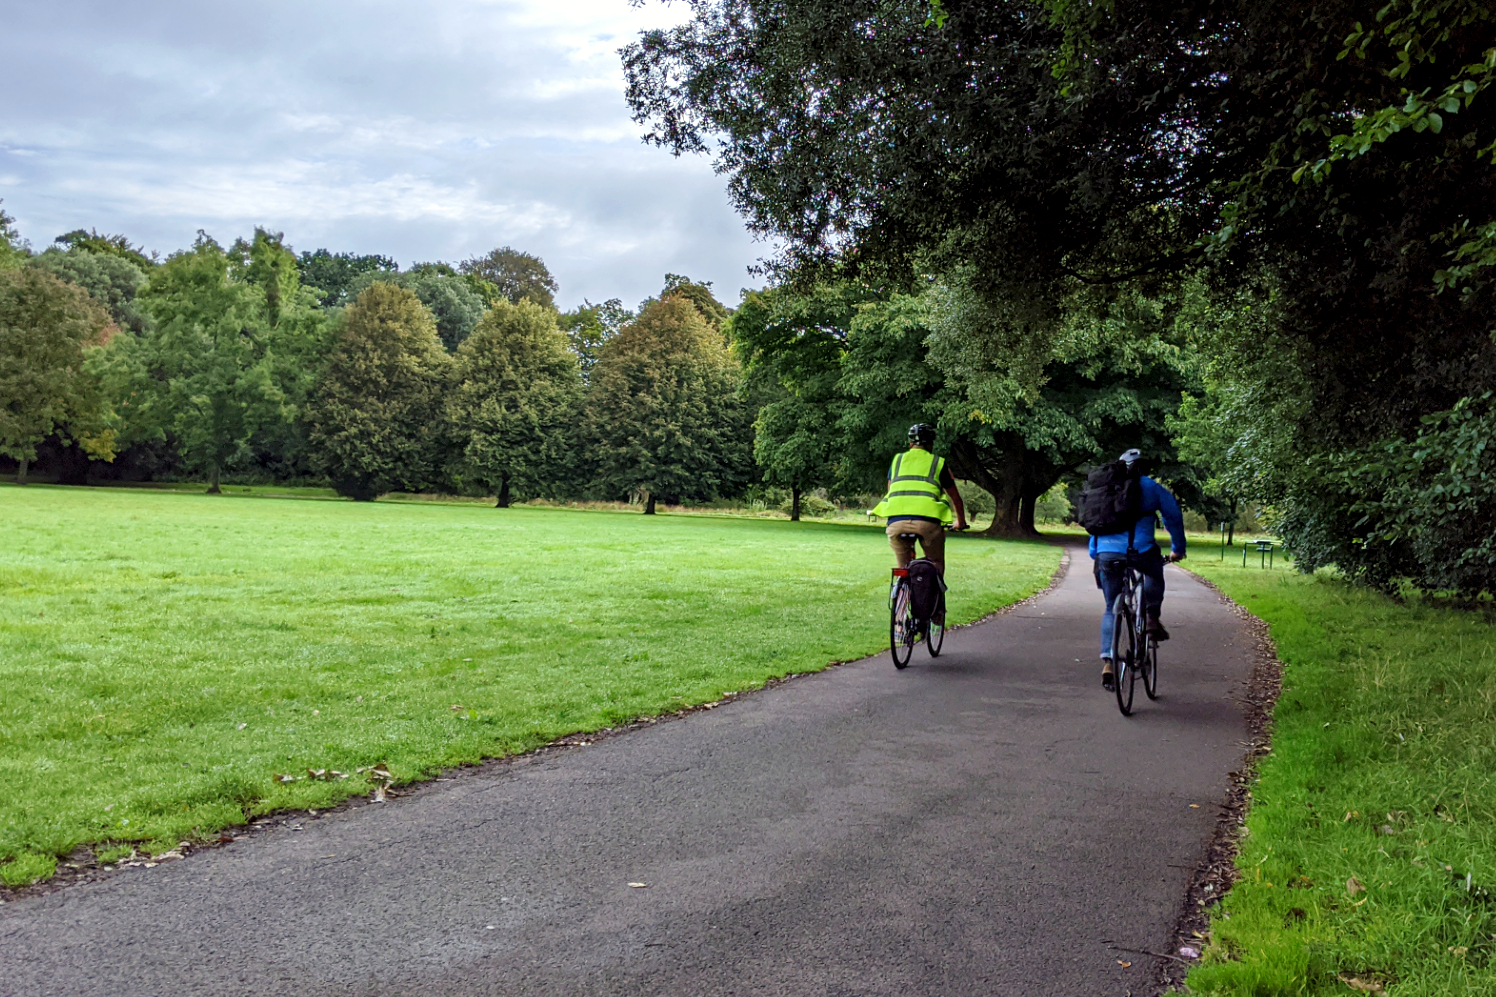 Walkers beware – parts of The Taff Trail are popular with speedy cyclists Ⓒ Emma Sparks